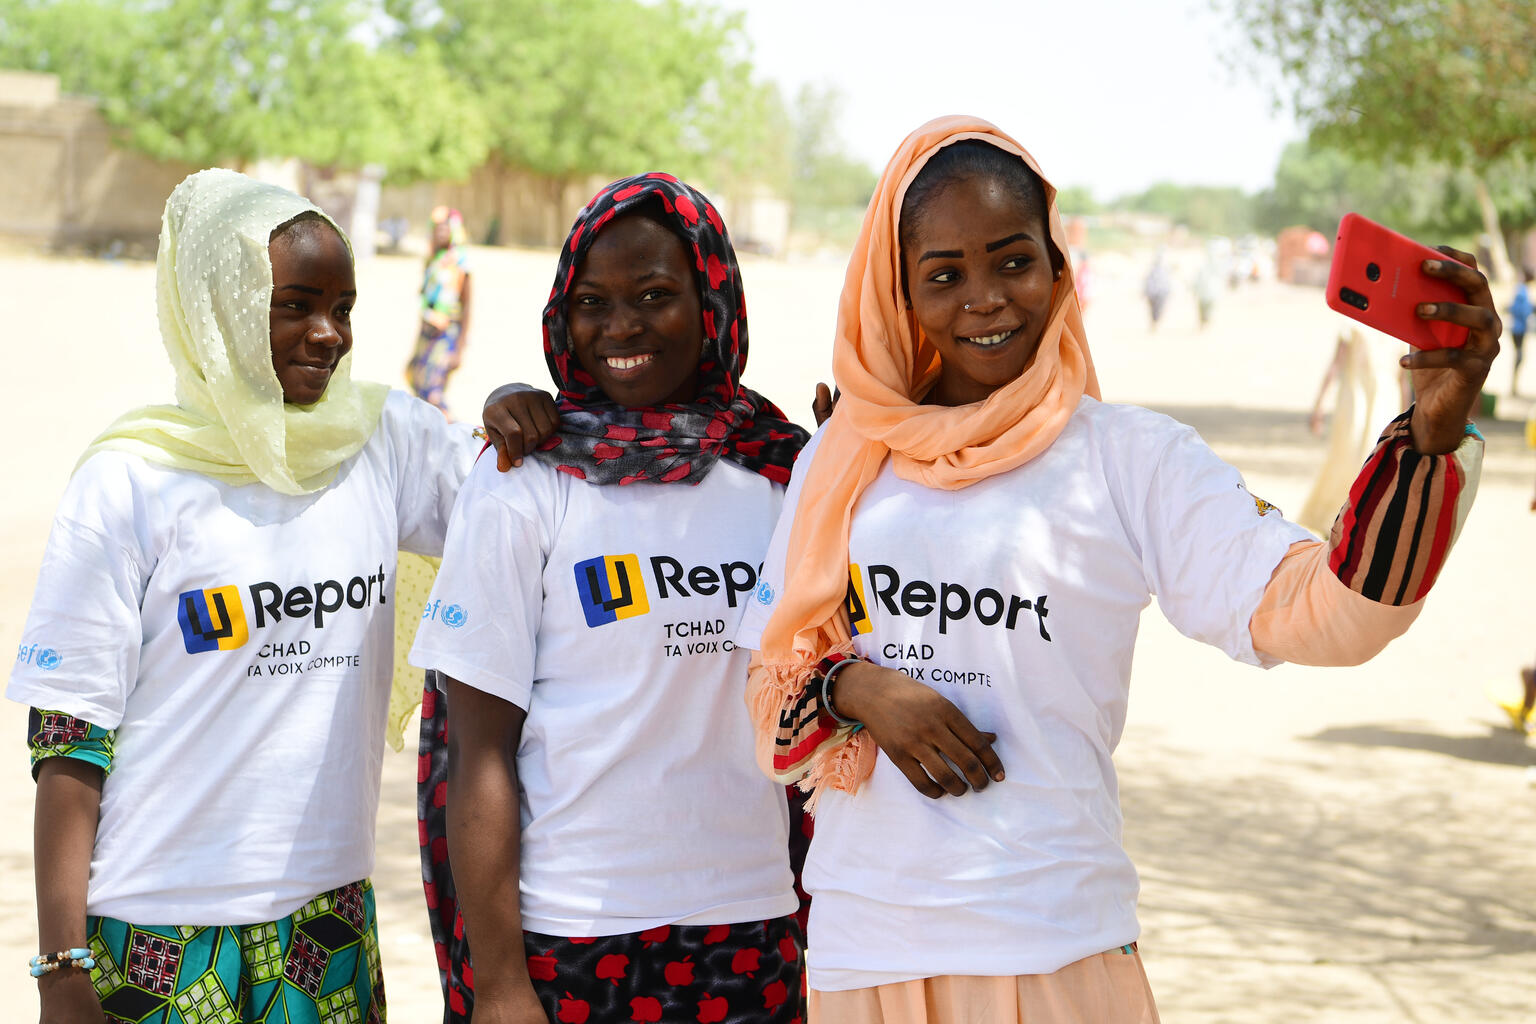 Adolescent girls attending a U-Report event in Chad